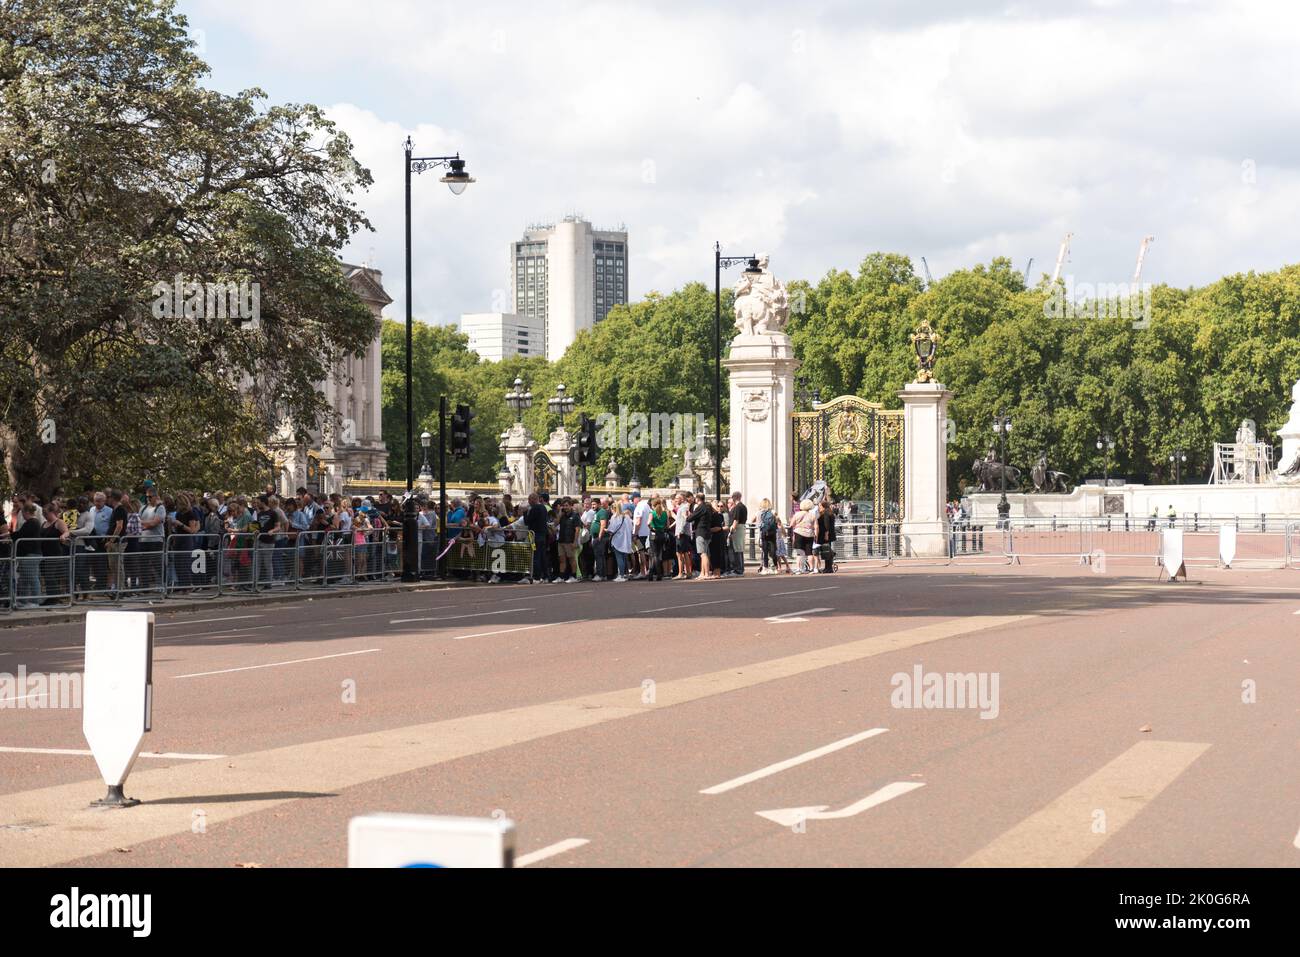 People waiting in long queue patiently to pay respect at Buckingham Palace Stock Photo